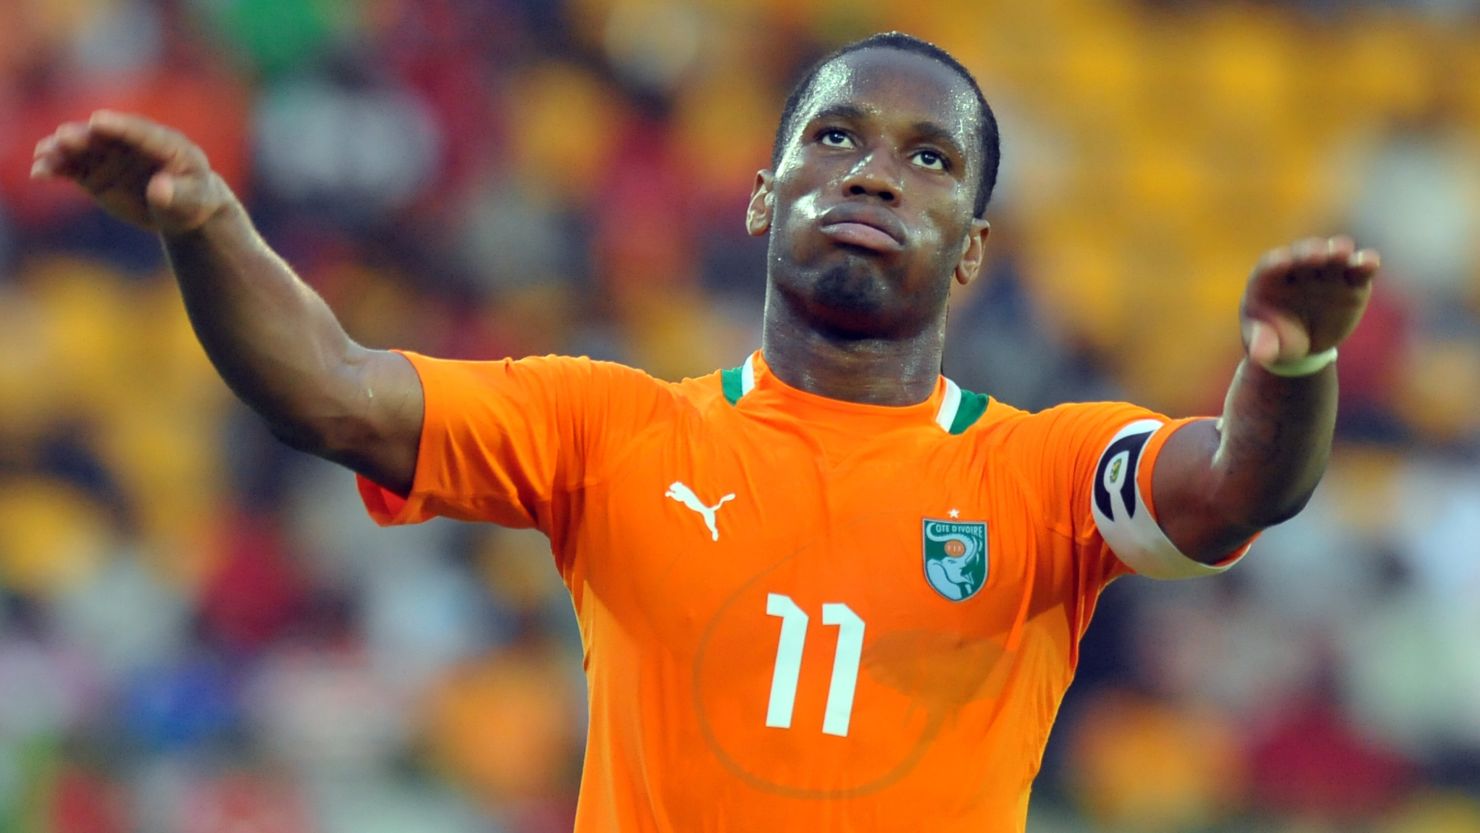 Dider Drogba scored the winner as the Ivory Coast defeated Sudan 1-0 at the Africa Cup of Nations.